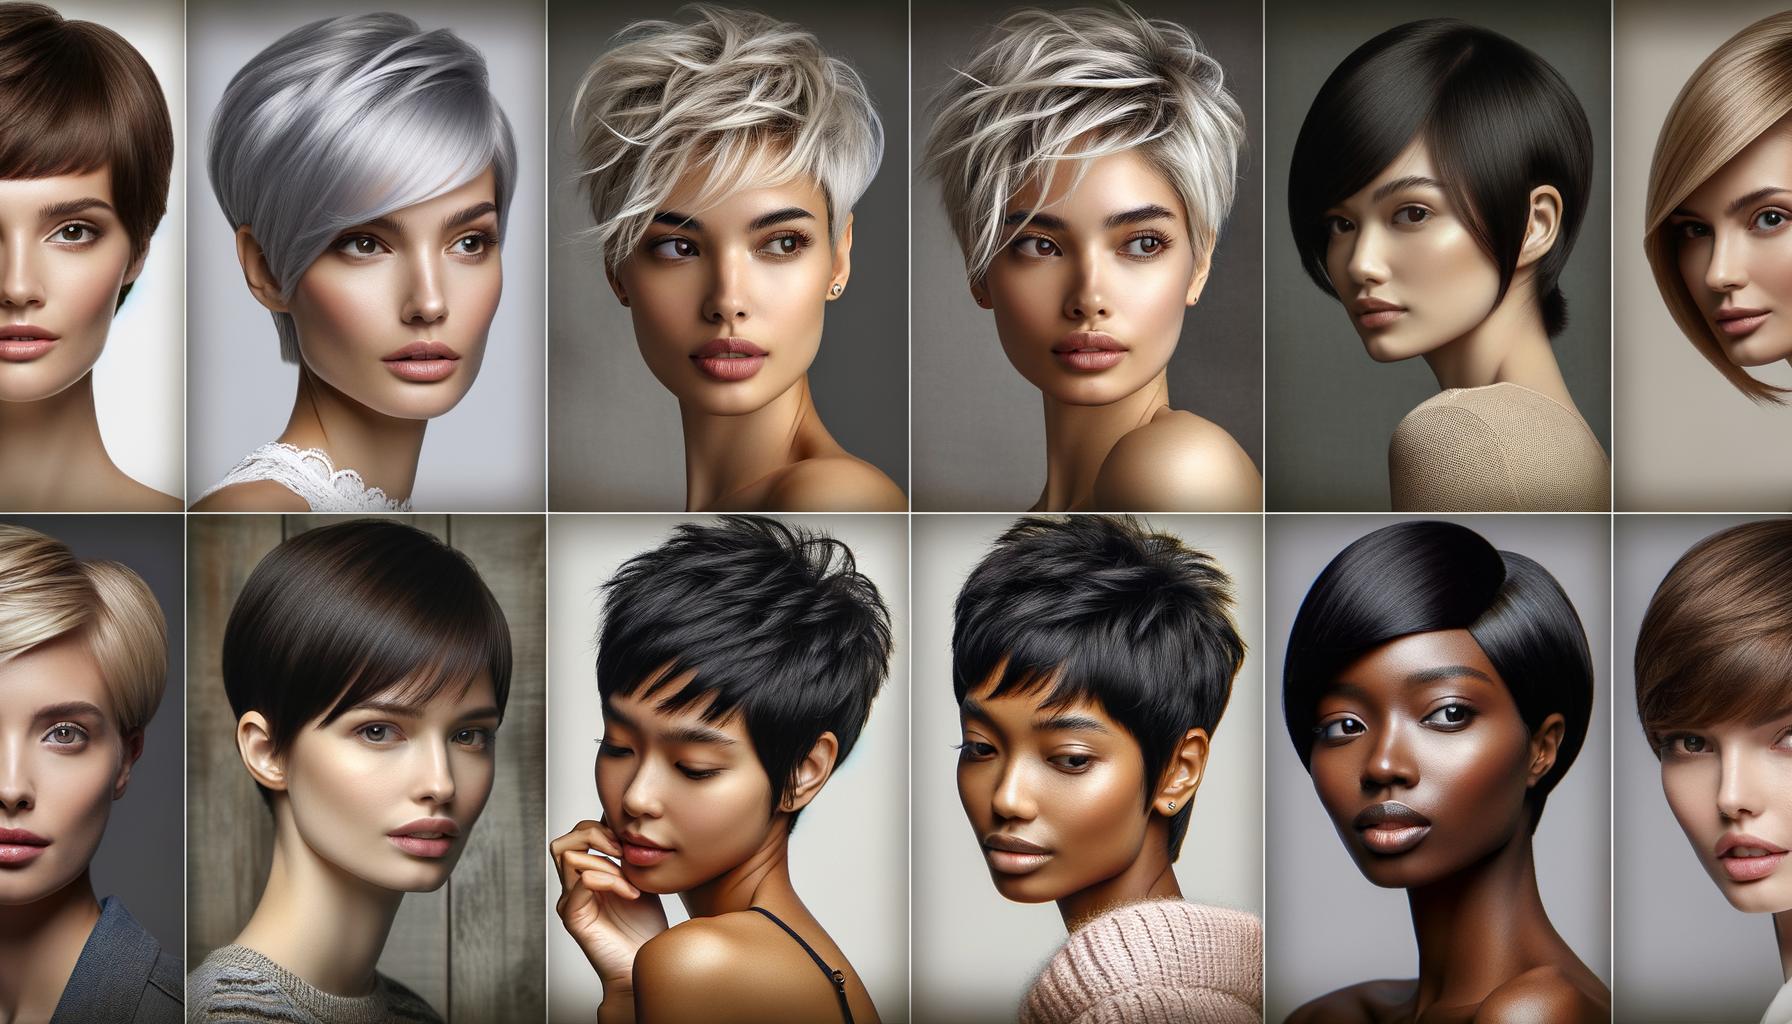 Explore the best short pixie cuts and pixie cut hairstyles for inspiration